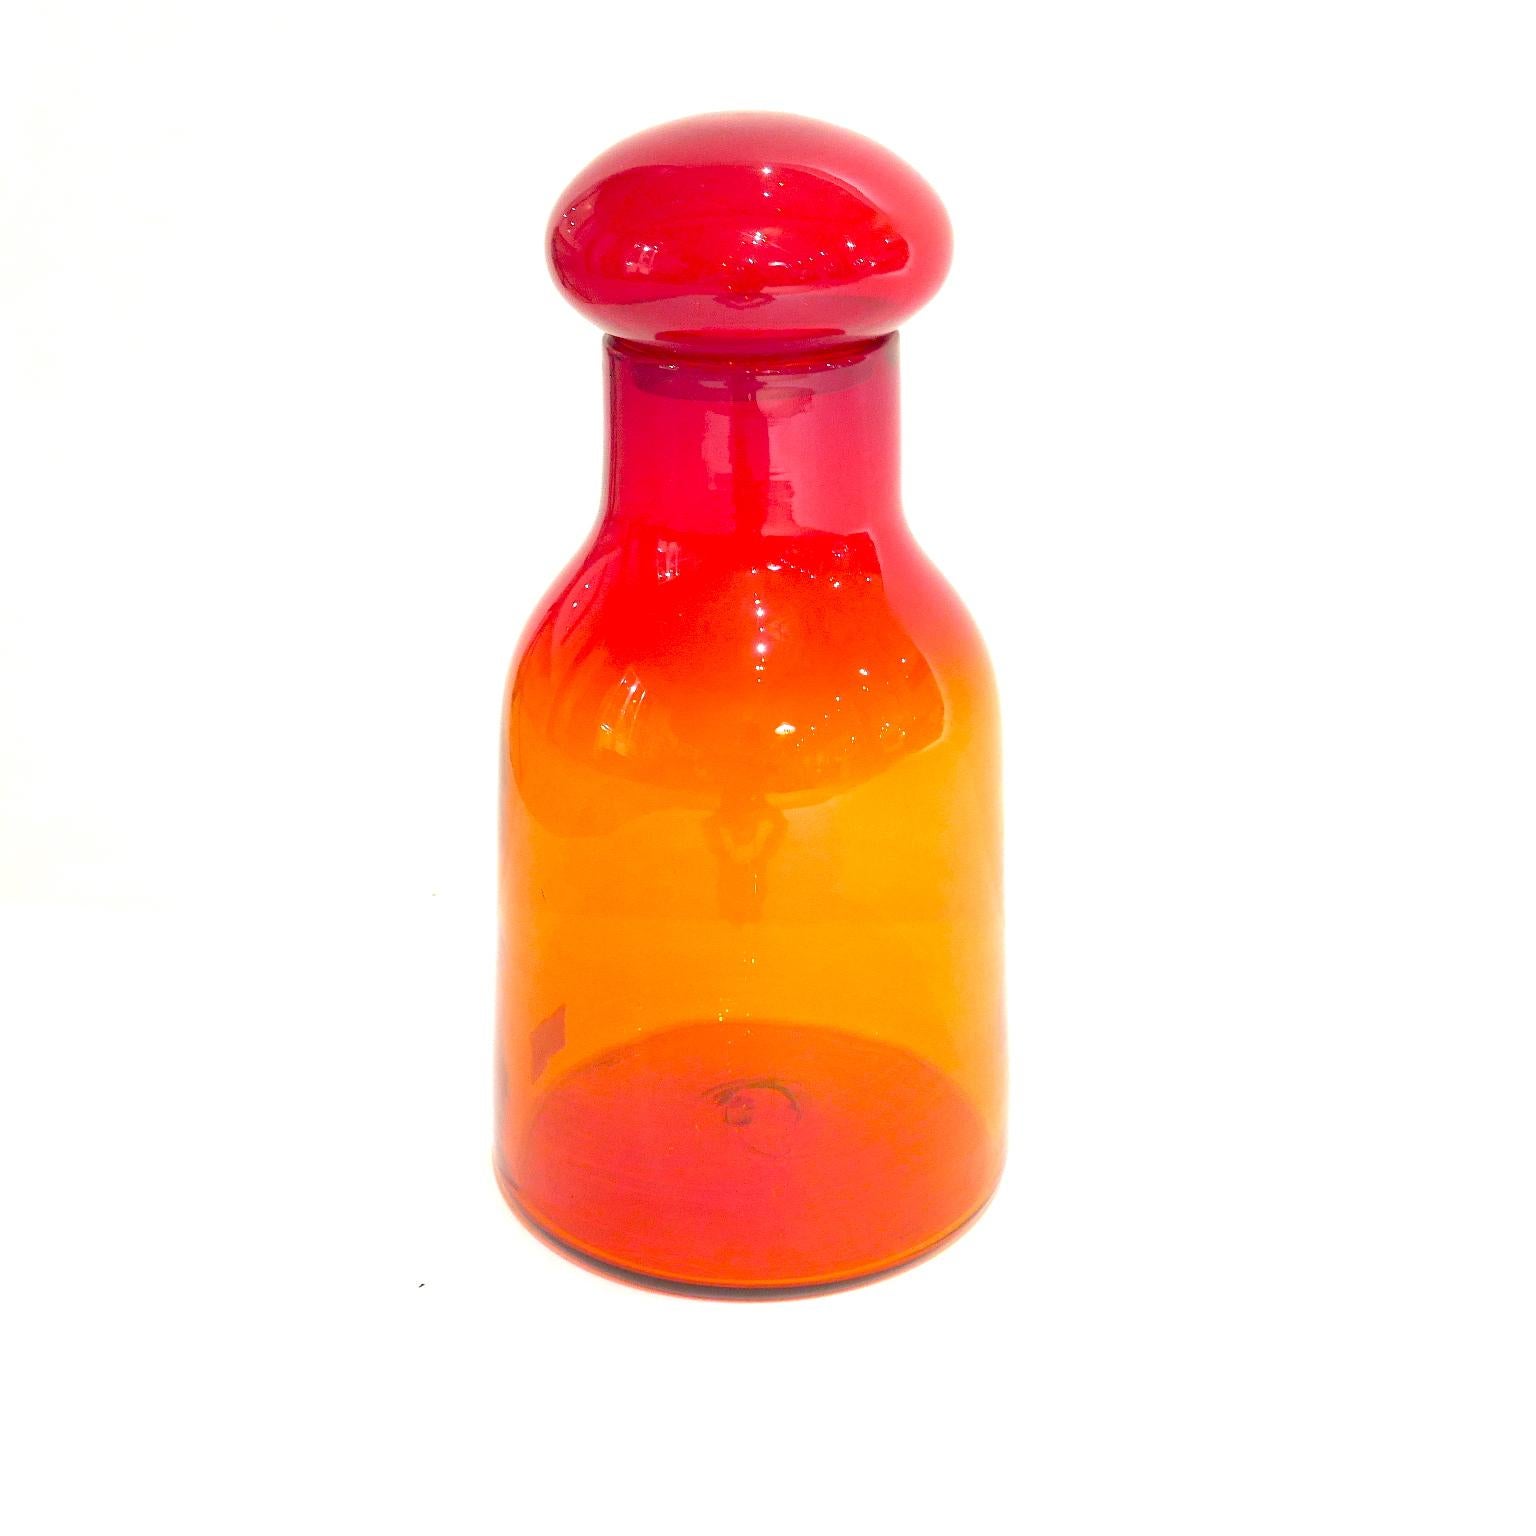 John Nickerson for Blenko architectural decanter #7430 with lid/stopper in a orange, red, yellow color in great condition.